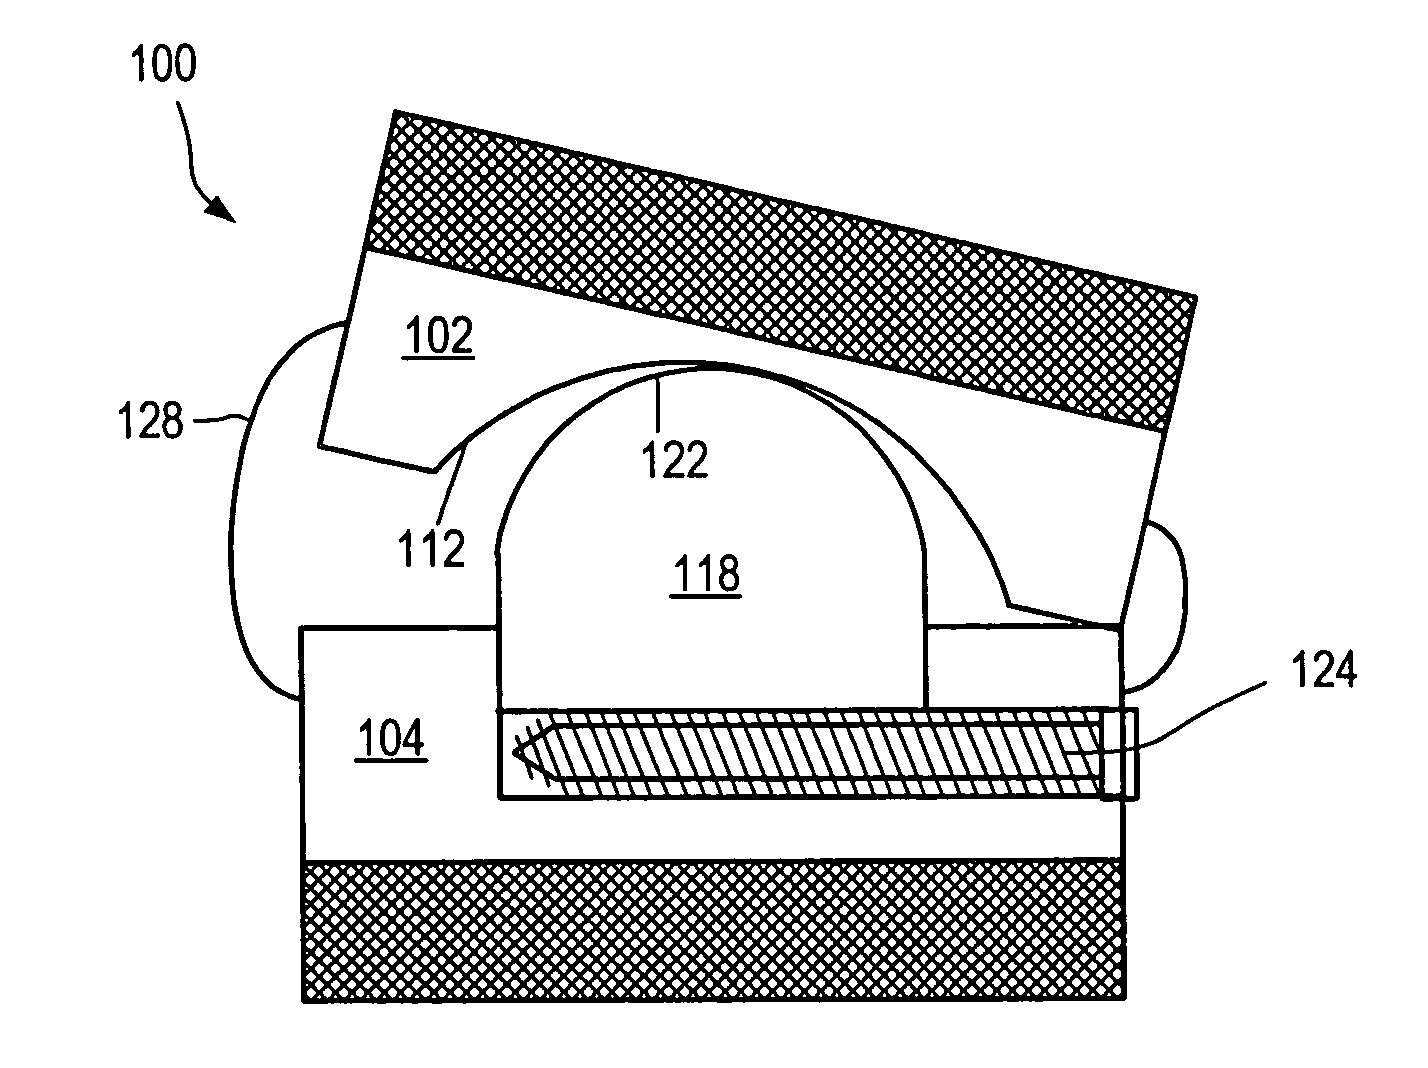 Method of inserting an expandable intervertebral implant without overdistraction